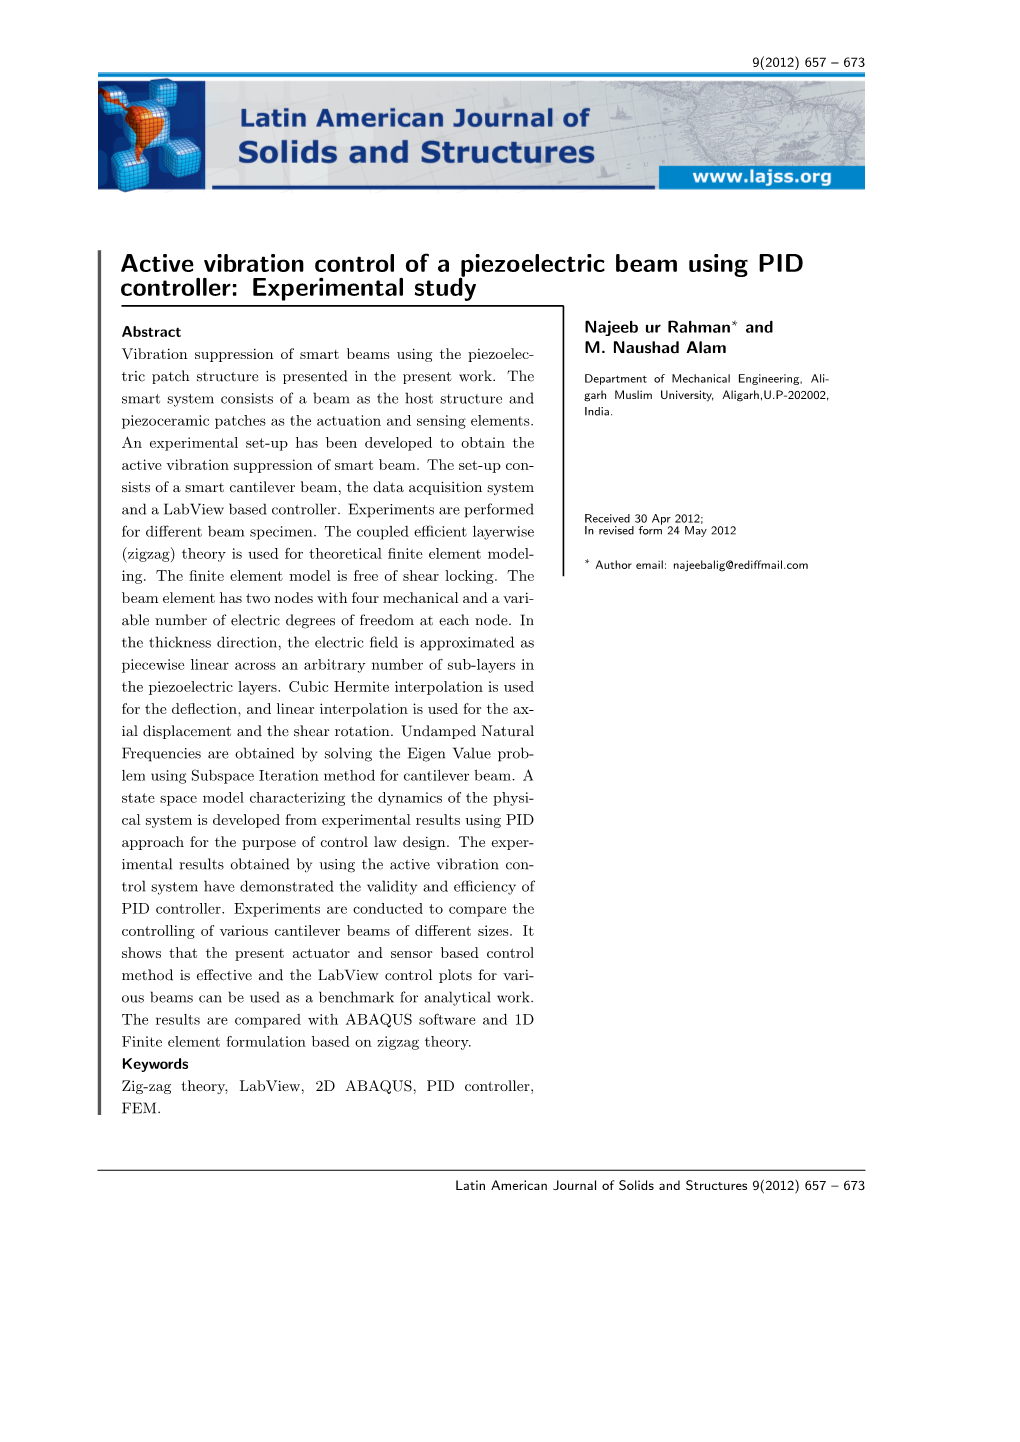 Active Vibration Control of a Piezoelectric Beam Using PID Controller: Experimental Study